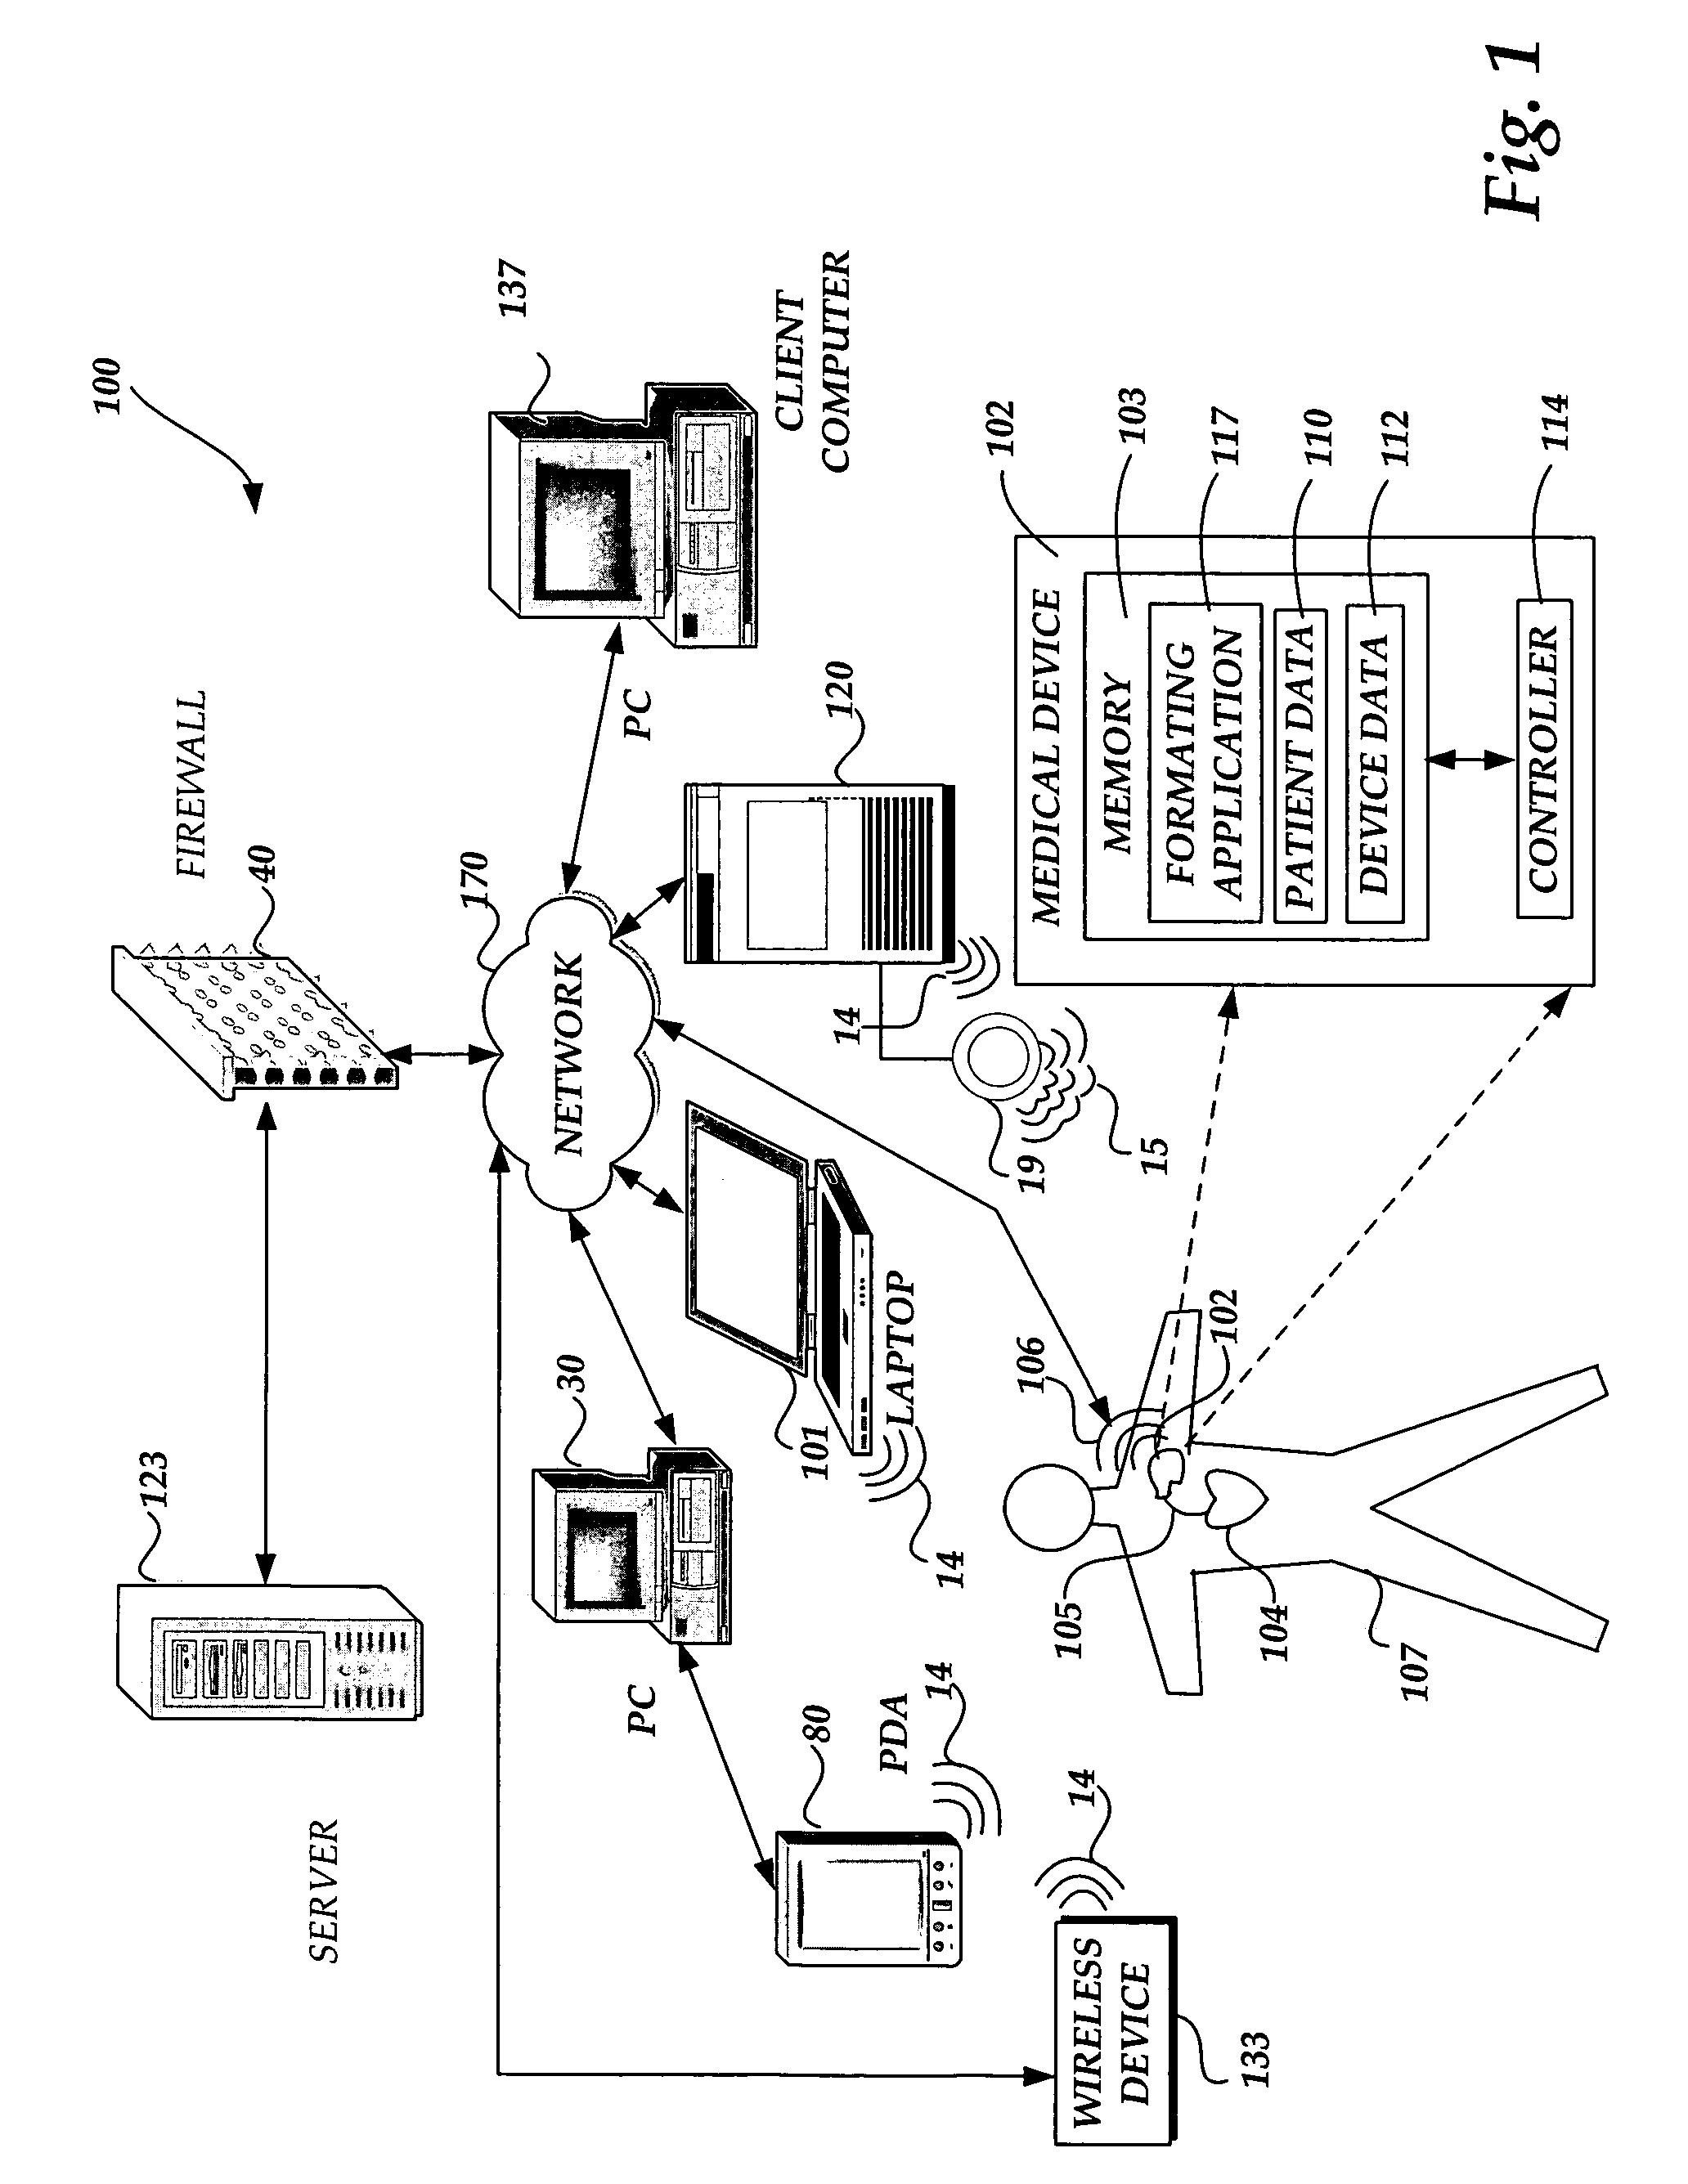 Generating and communicating web content from within an implantable medical device